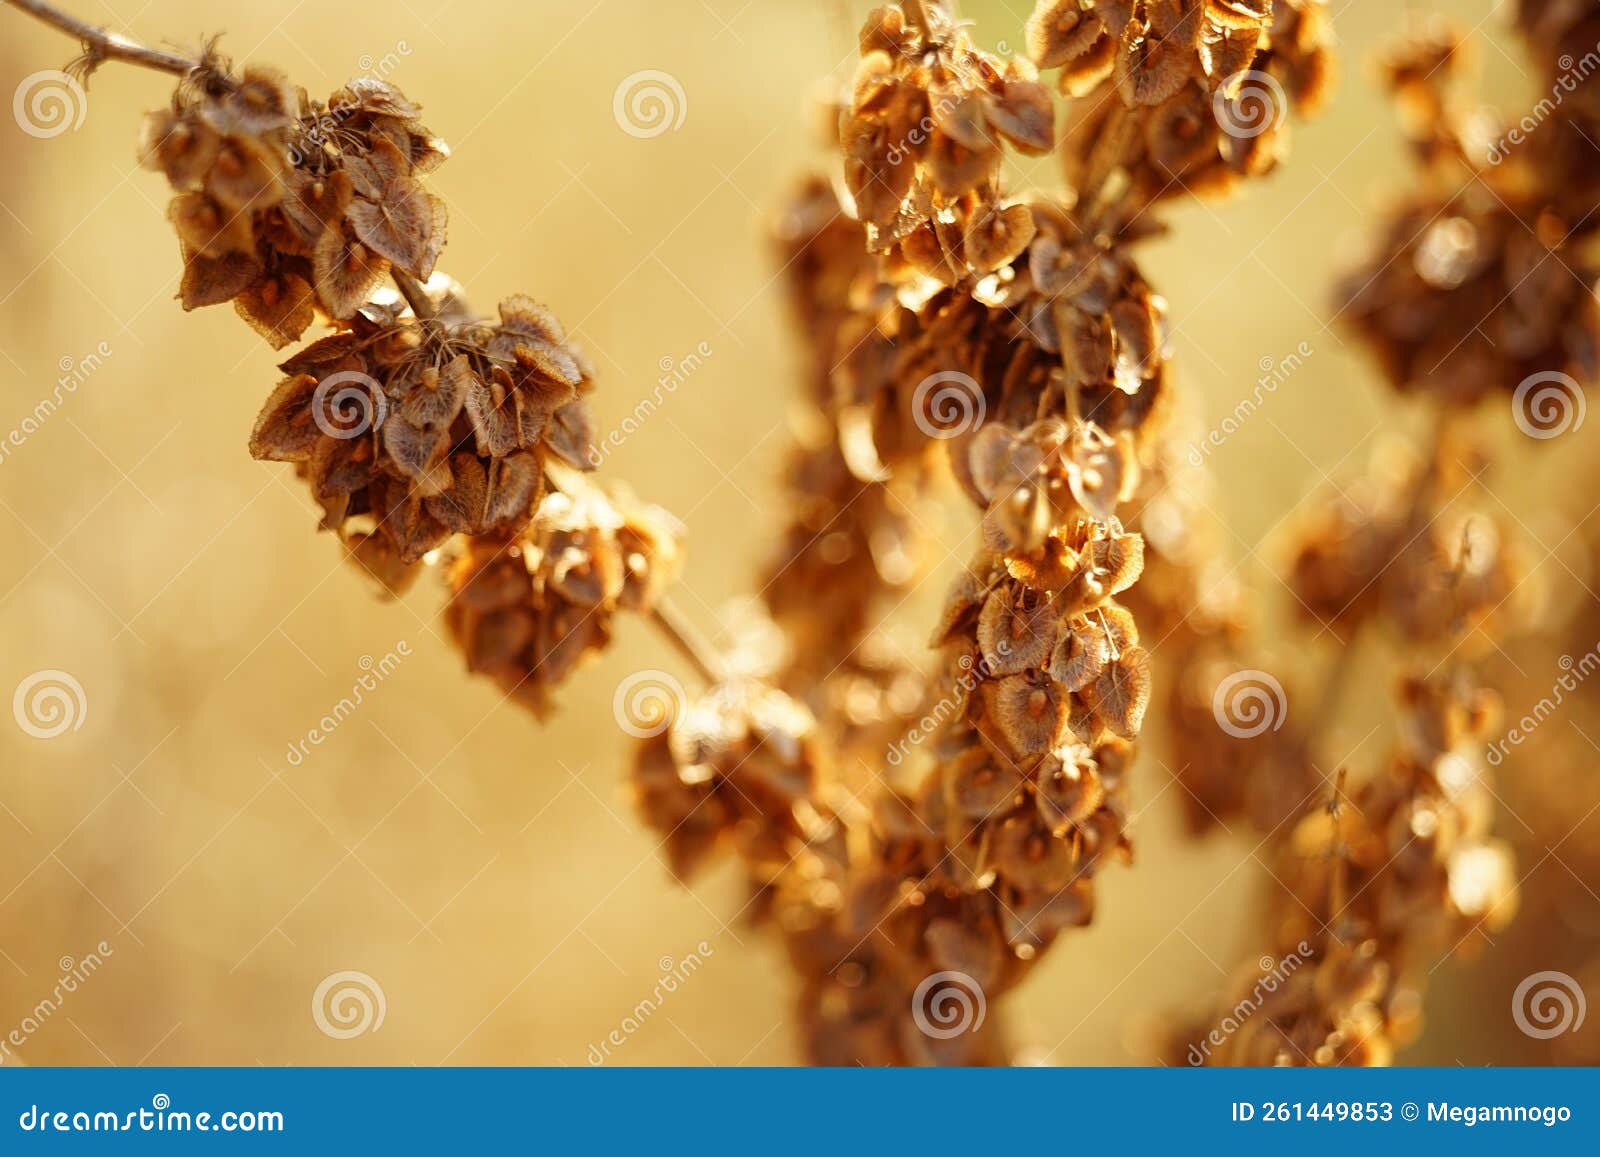 Dry Plant with Seeds Grow in the Autumn Garden Stock Image - Image of ...